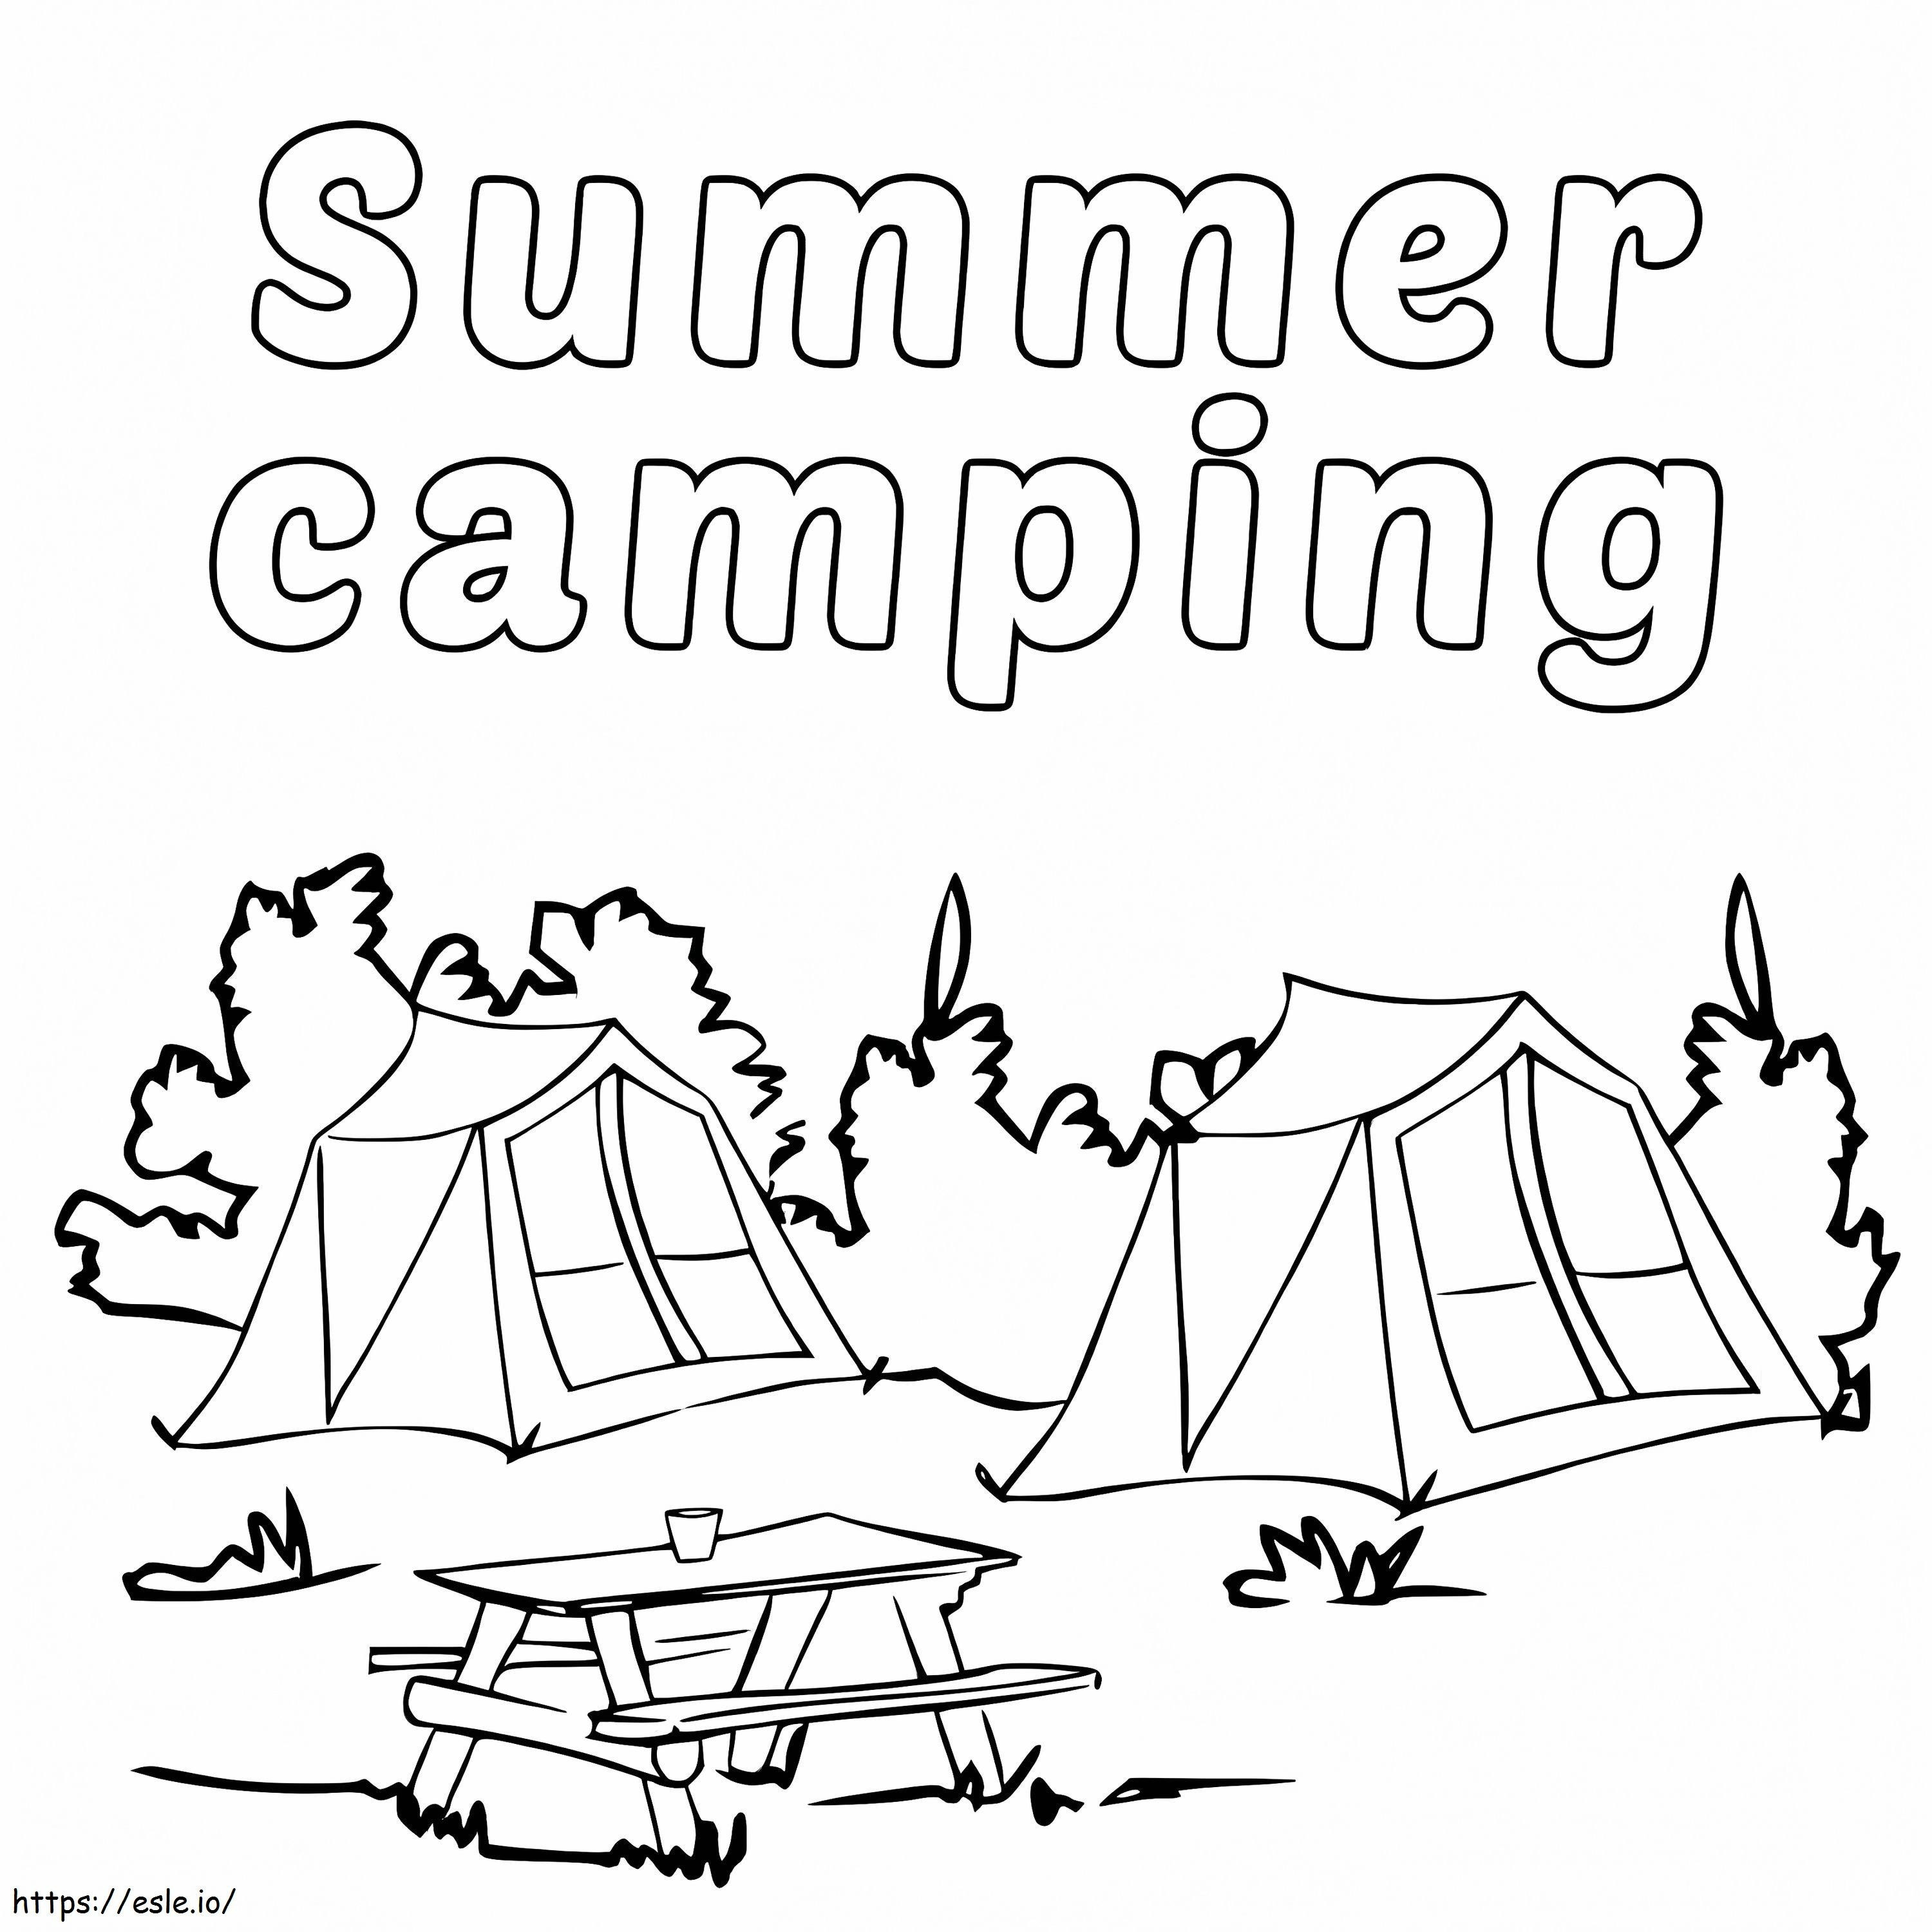 Summer Camping coloring page